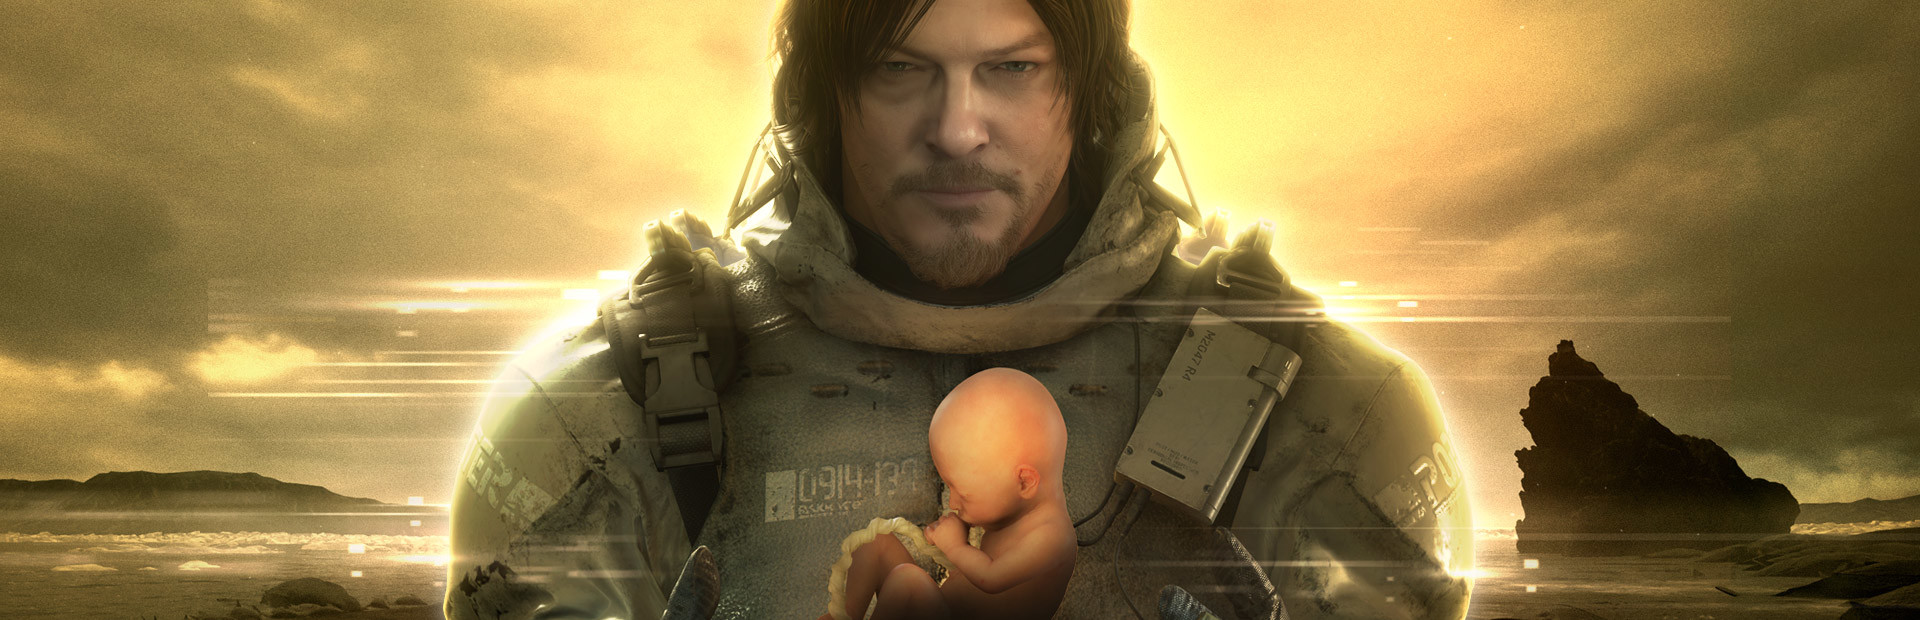 DEATH STRANDING DIRECTOR'S CUT cover image